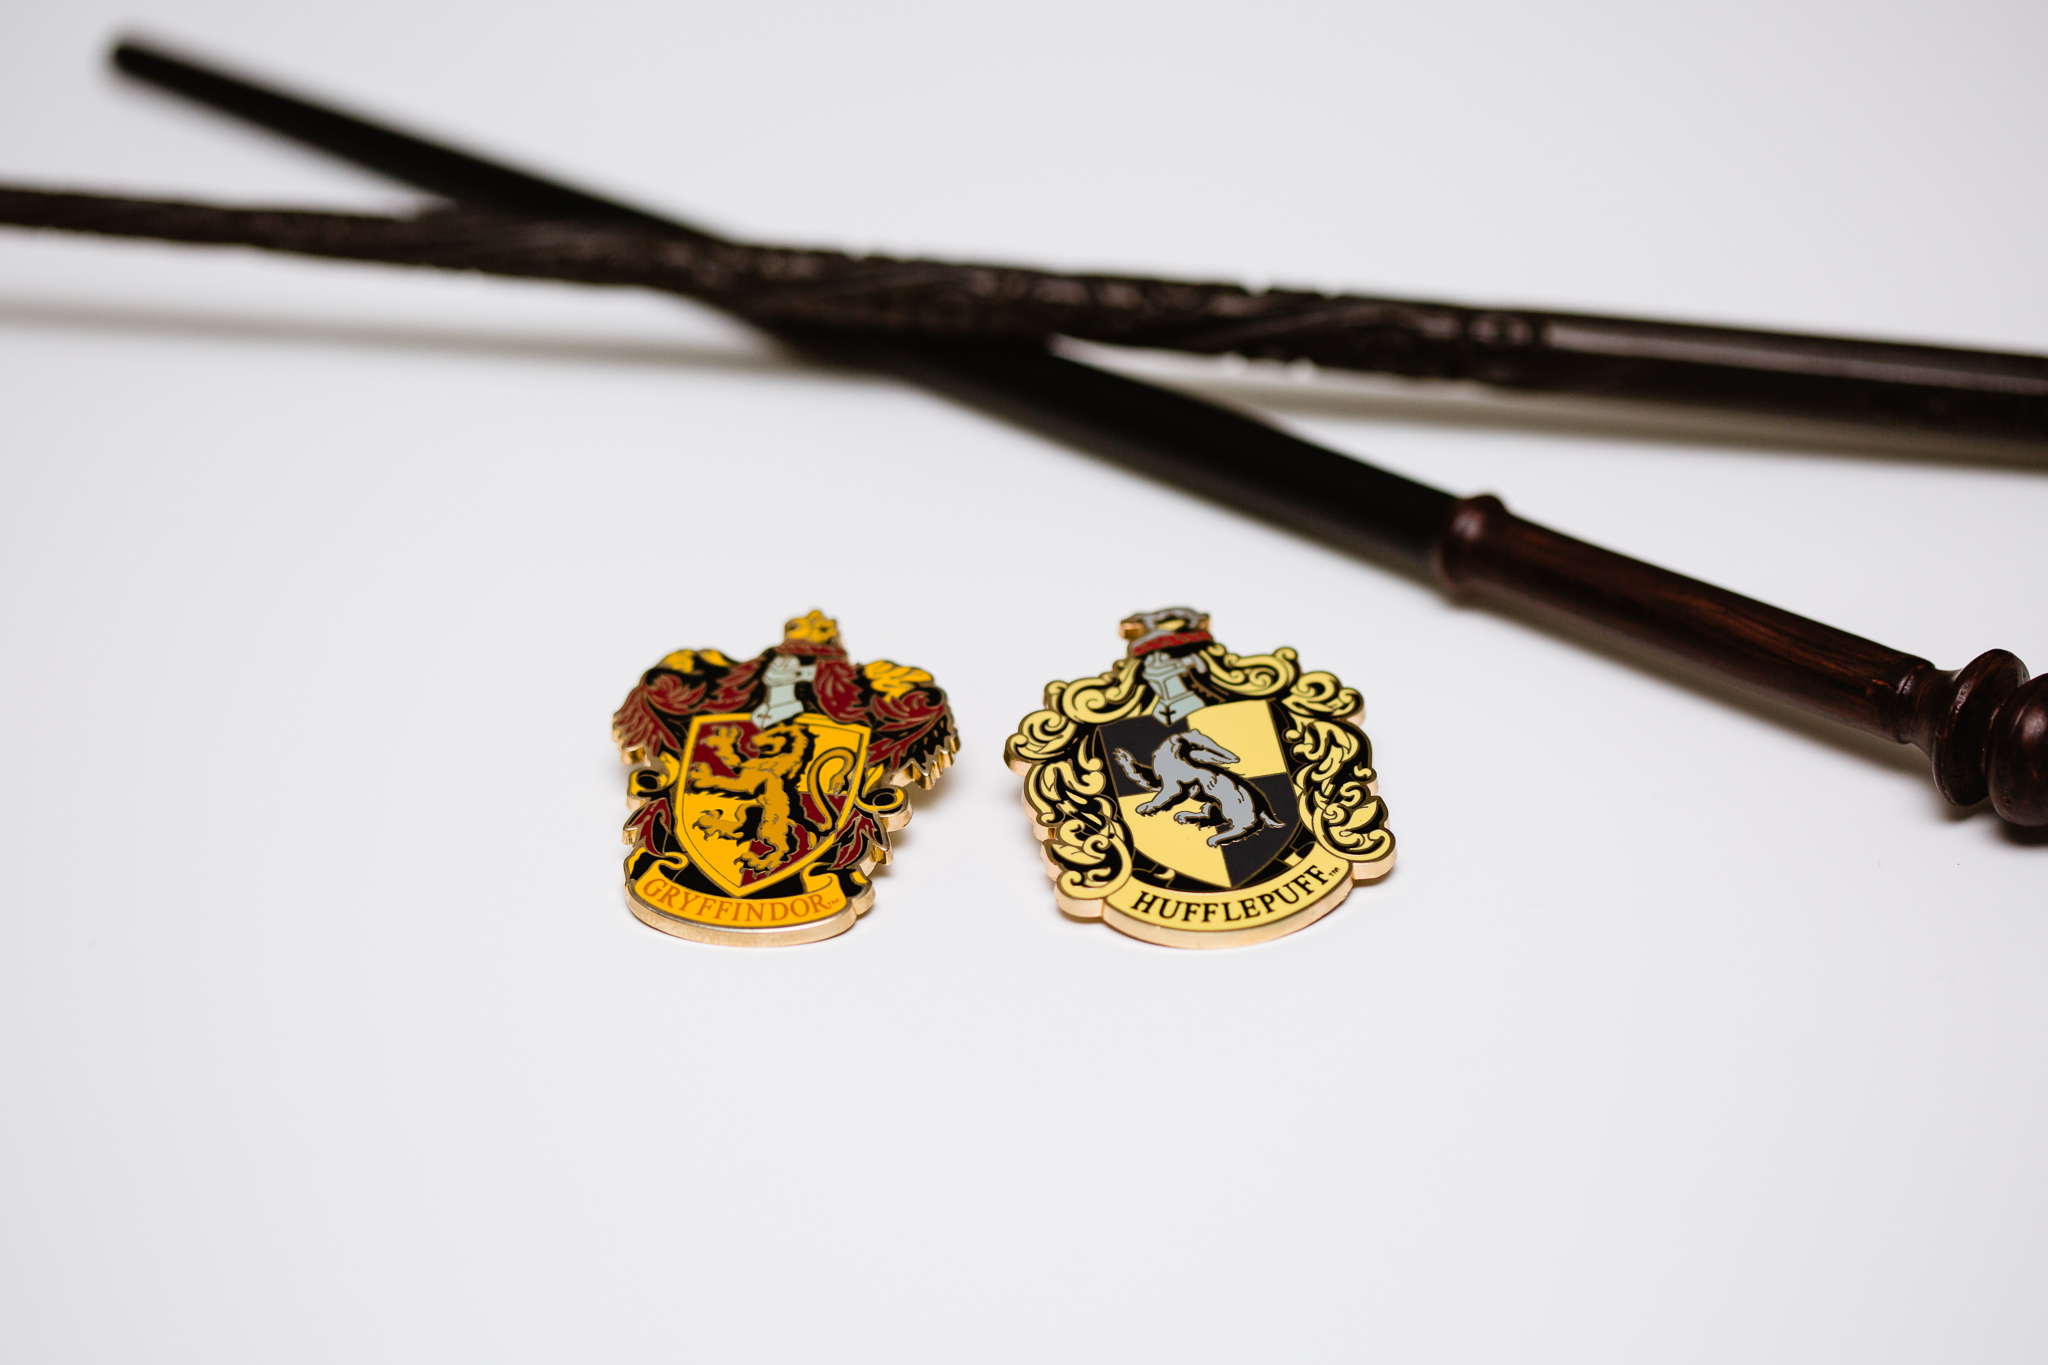 Harry Potter Pins and Wands for Harry Potter Marathon